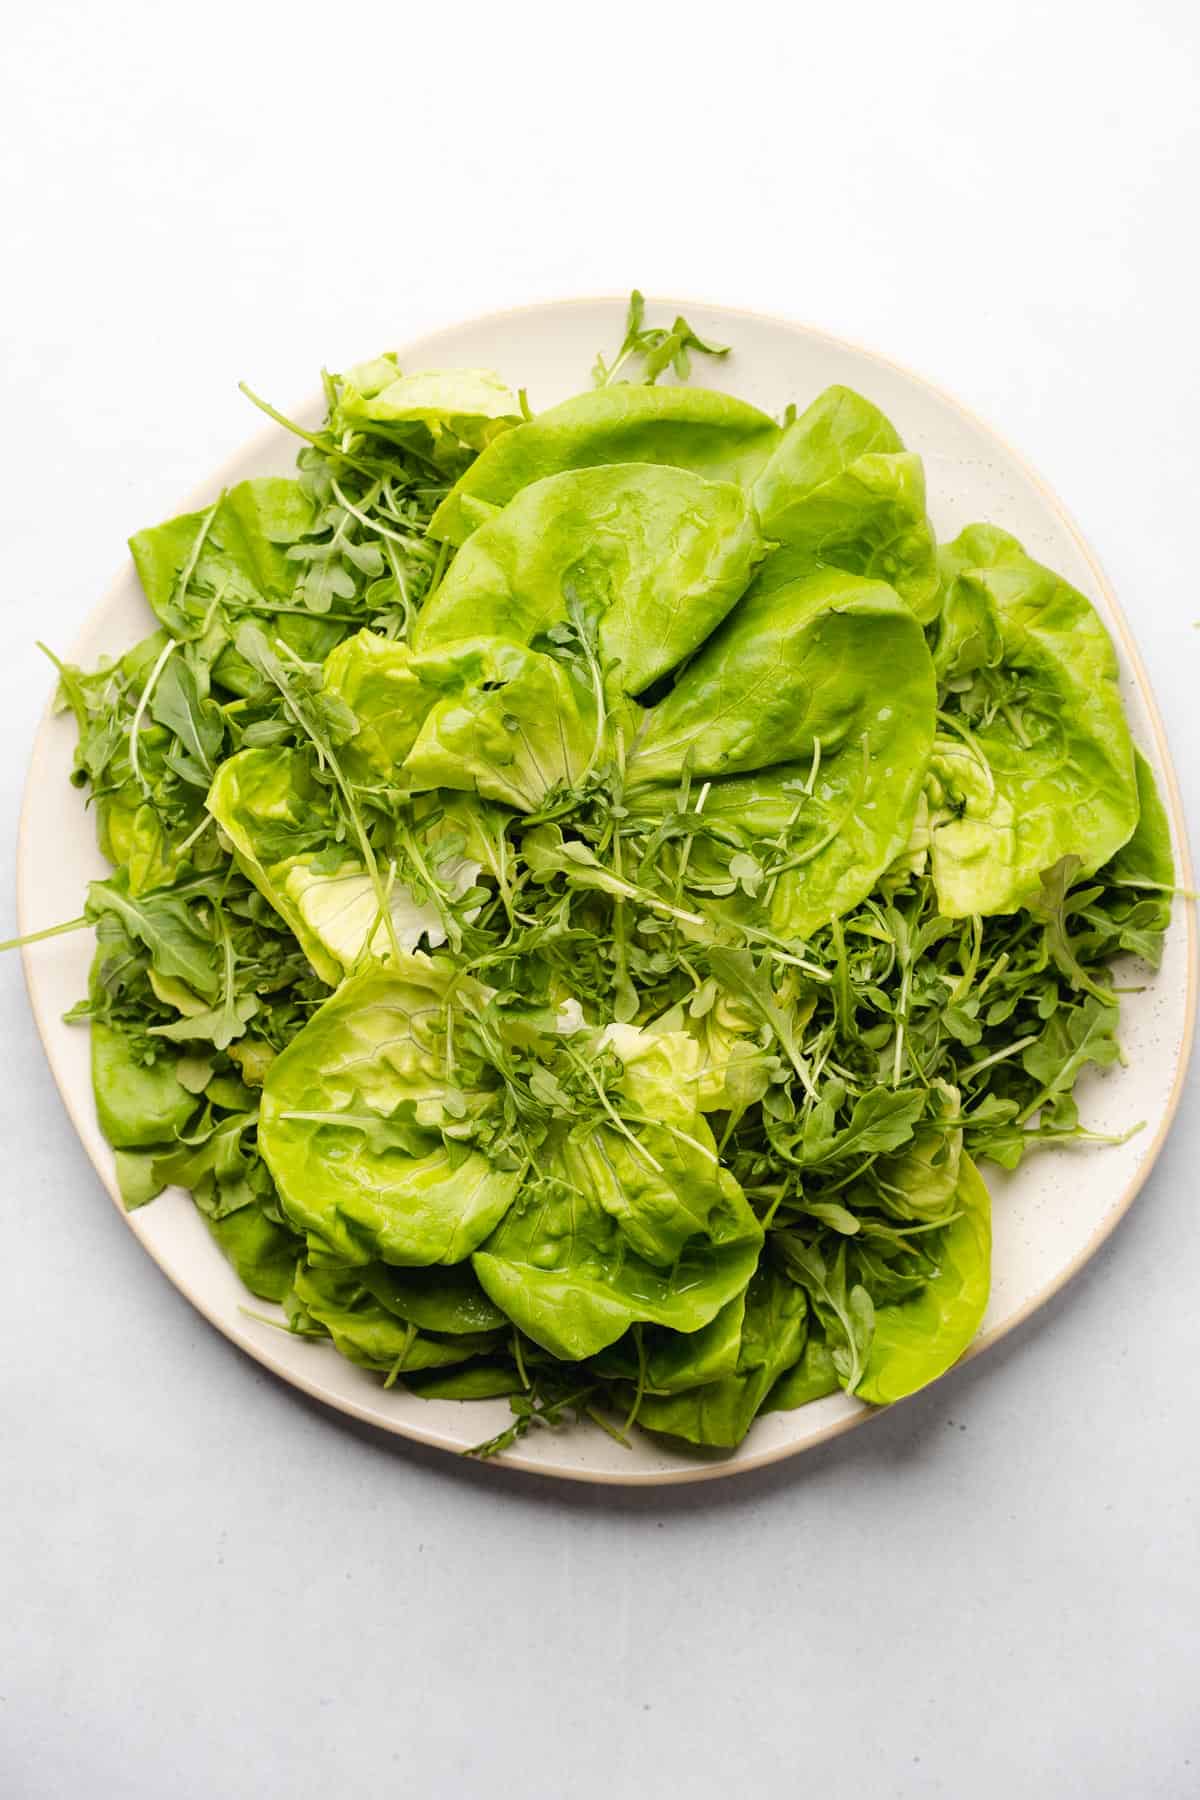 butter lettuce and arugula on a serving plate to make a salad